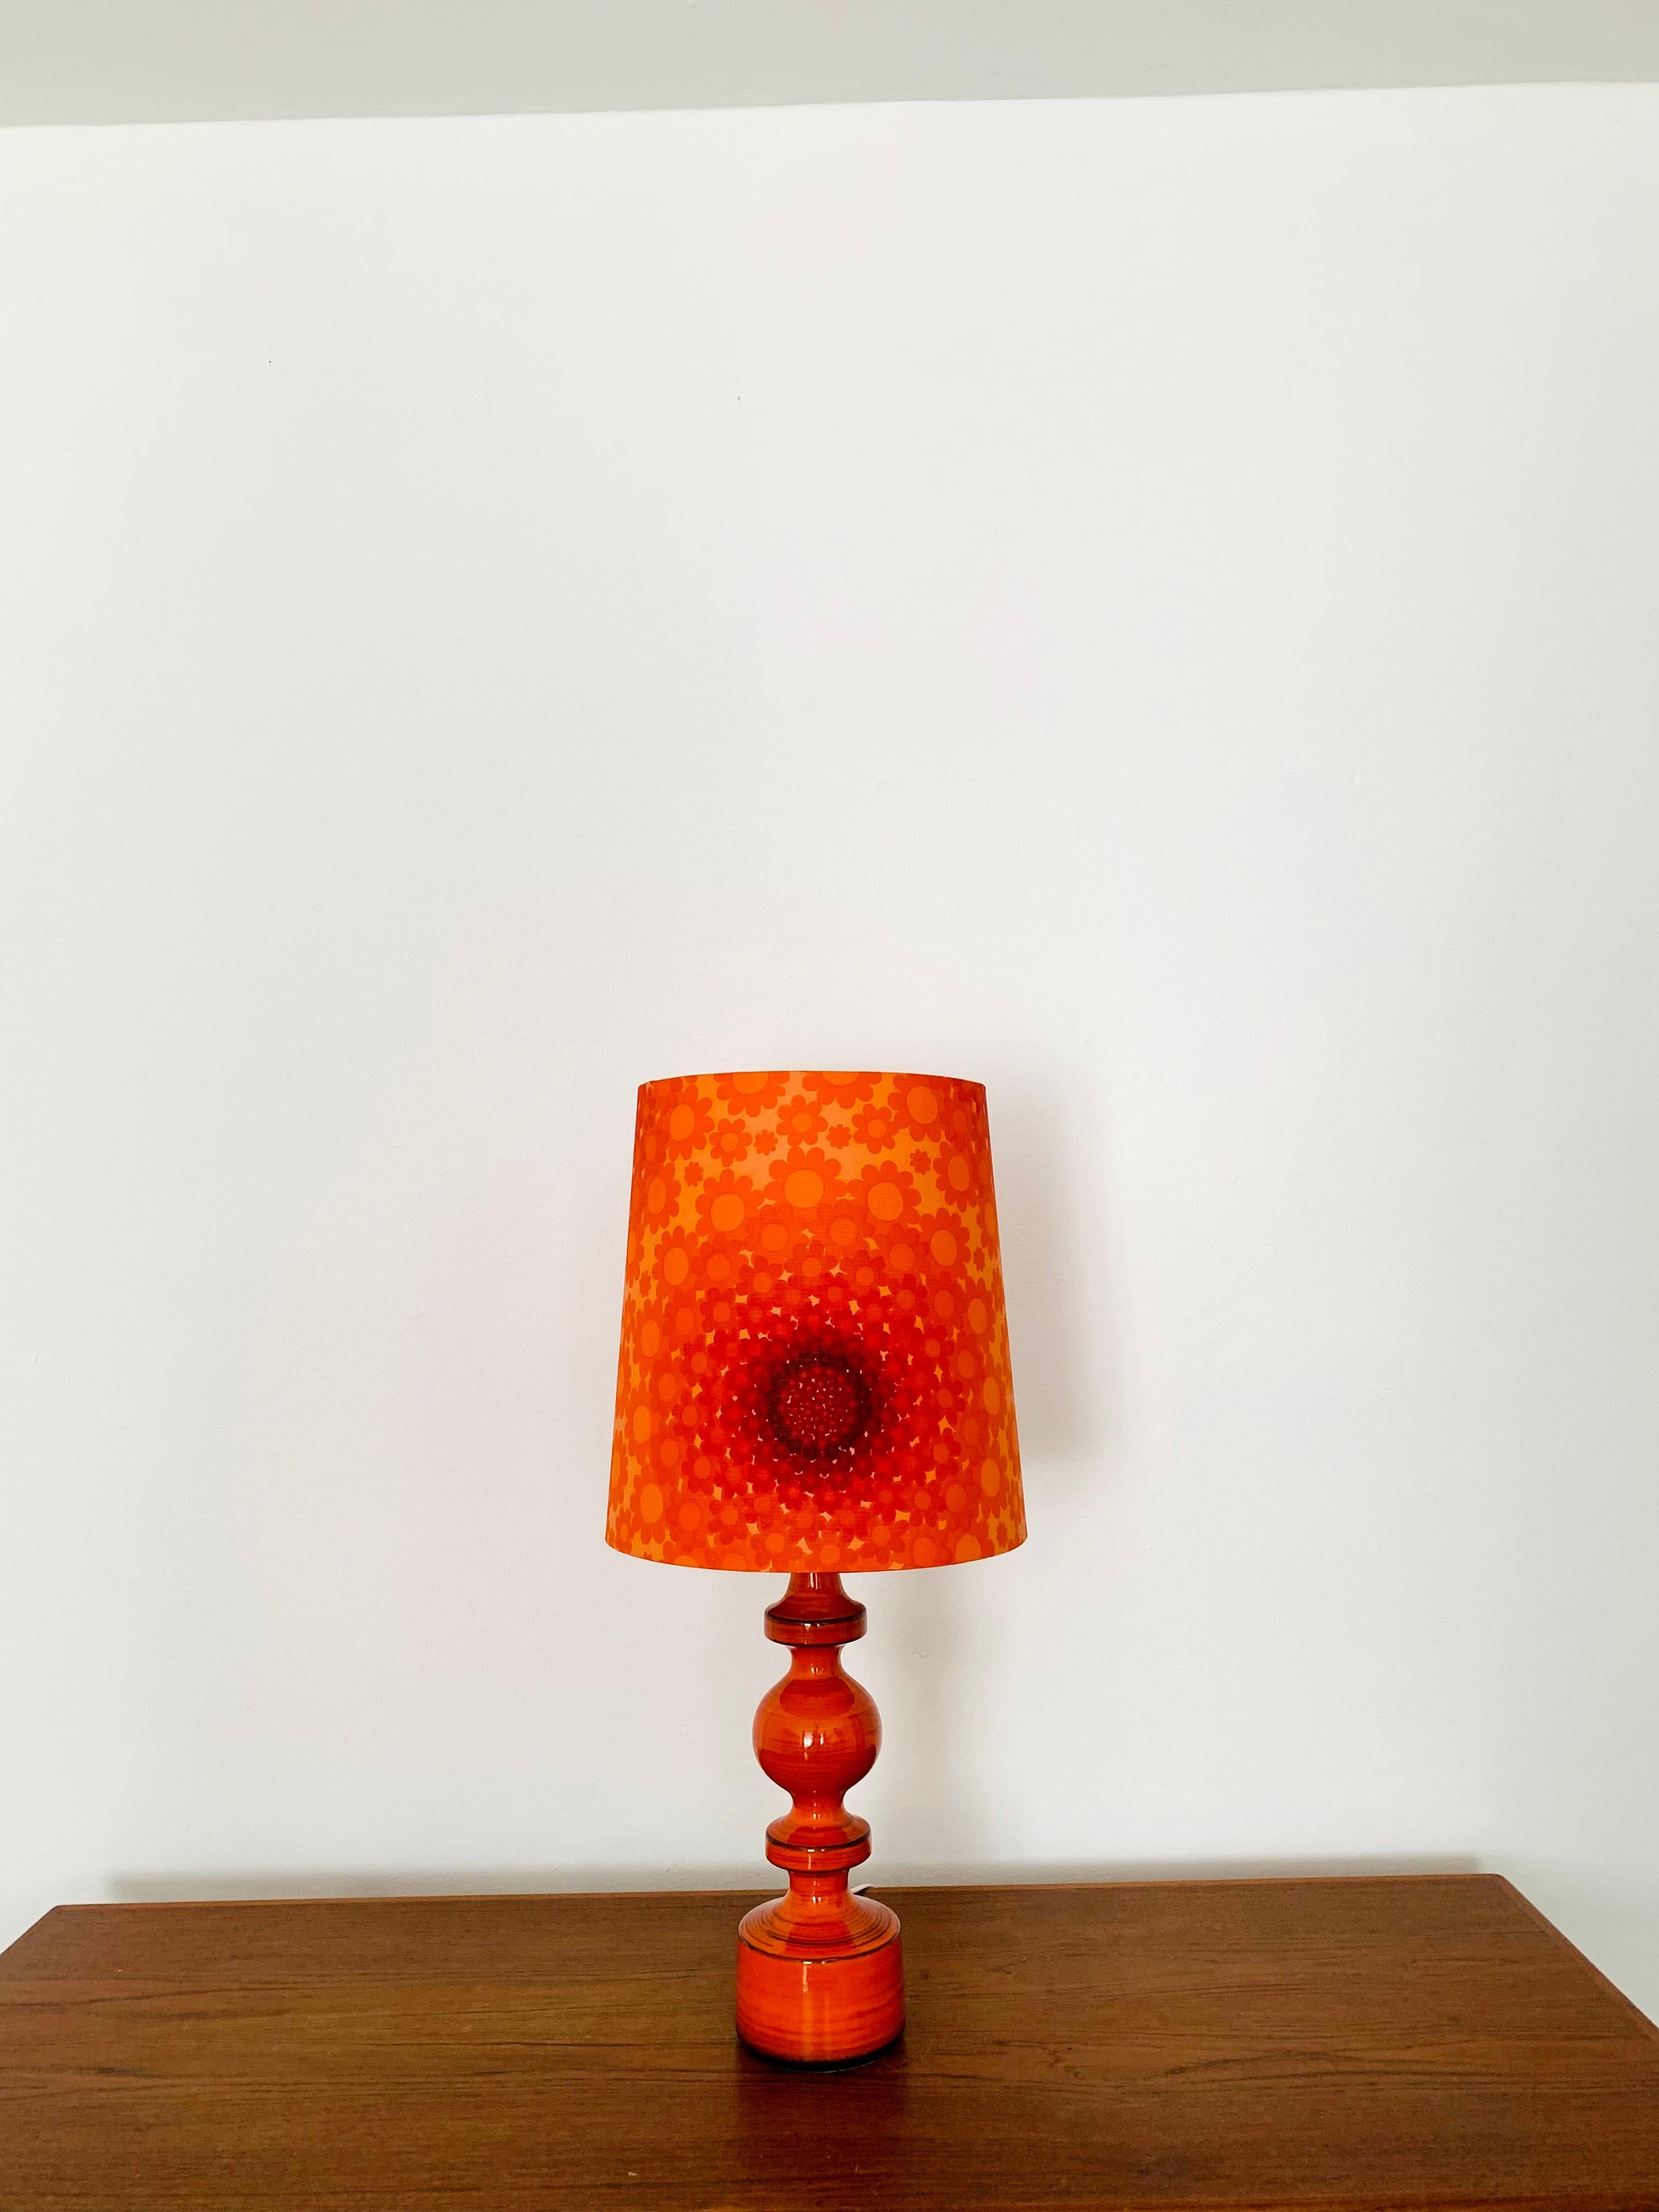 Very nice ceramic table lamp from the 1960s.
Wonderful design and finish.
The lamp with the hand-painted glaze is a real eye-catcher.

Condition:

Very good vintage condition with slight signs of wear consistent with age.
Slight signs of wear